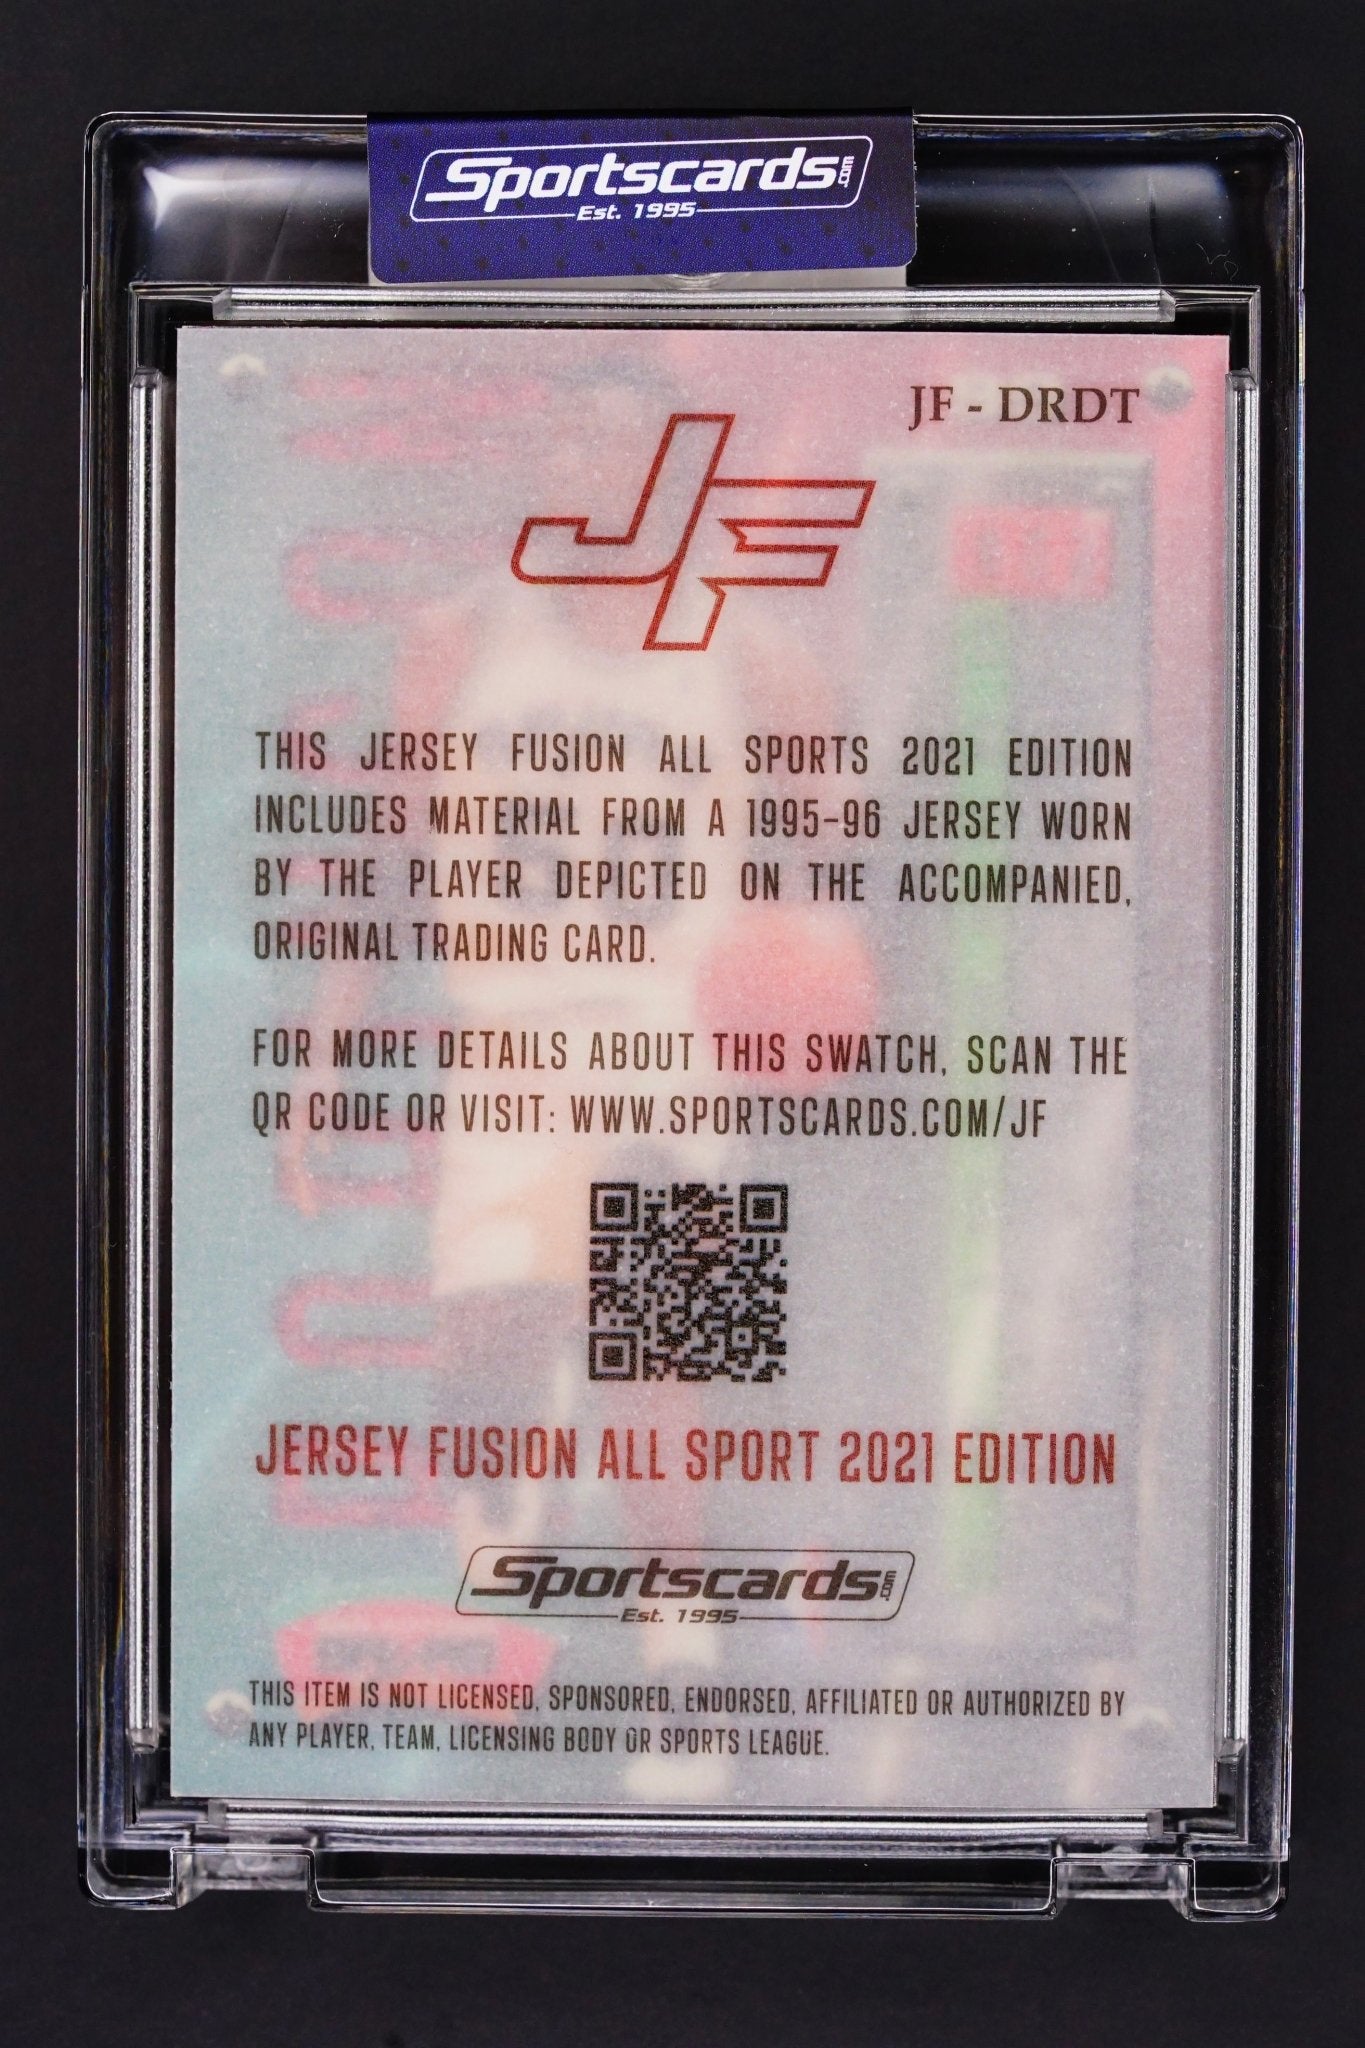 Basketball Card: David Robinson 30/99 Number patch - THE CARD SPOT PTY LTD.Sports CardJersey Fusion